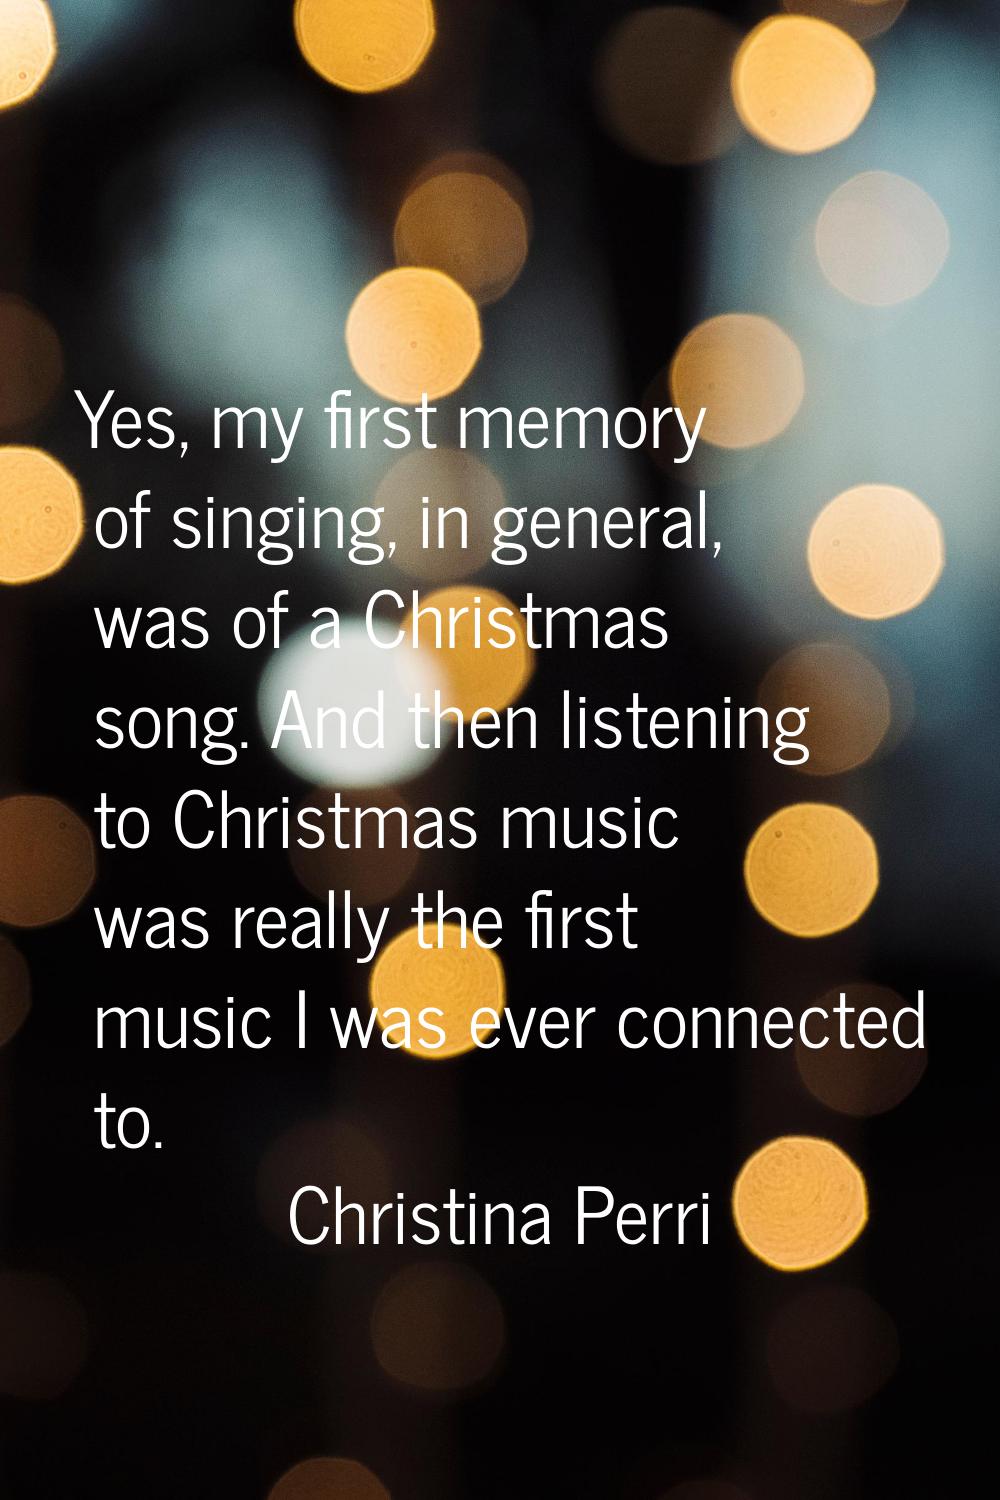 Yes, my first memory of singing, in general, was of a Christmas song. And then listening to Christm